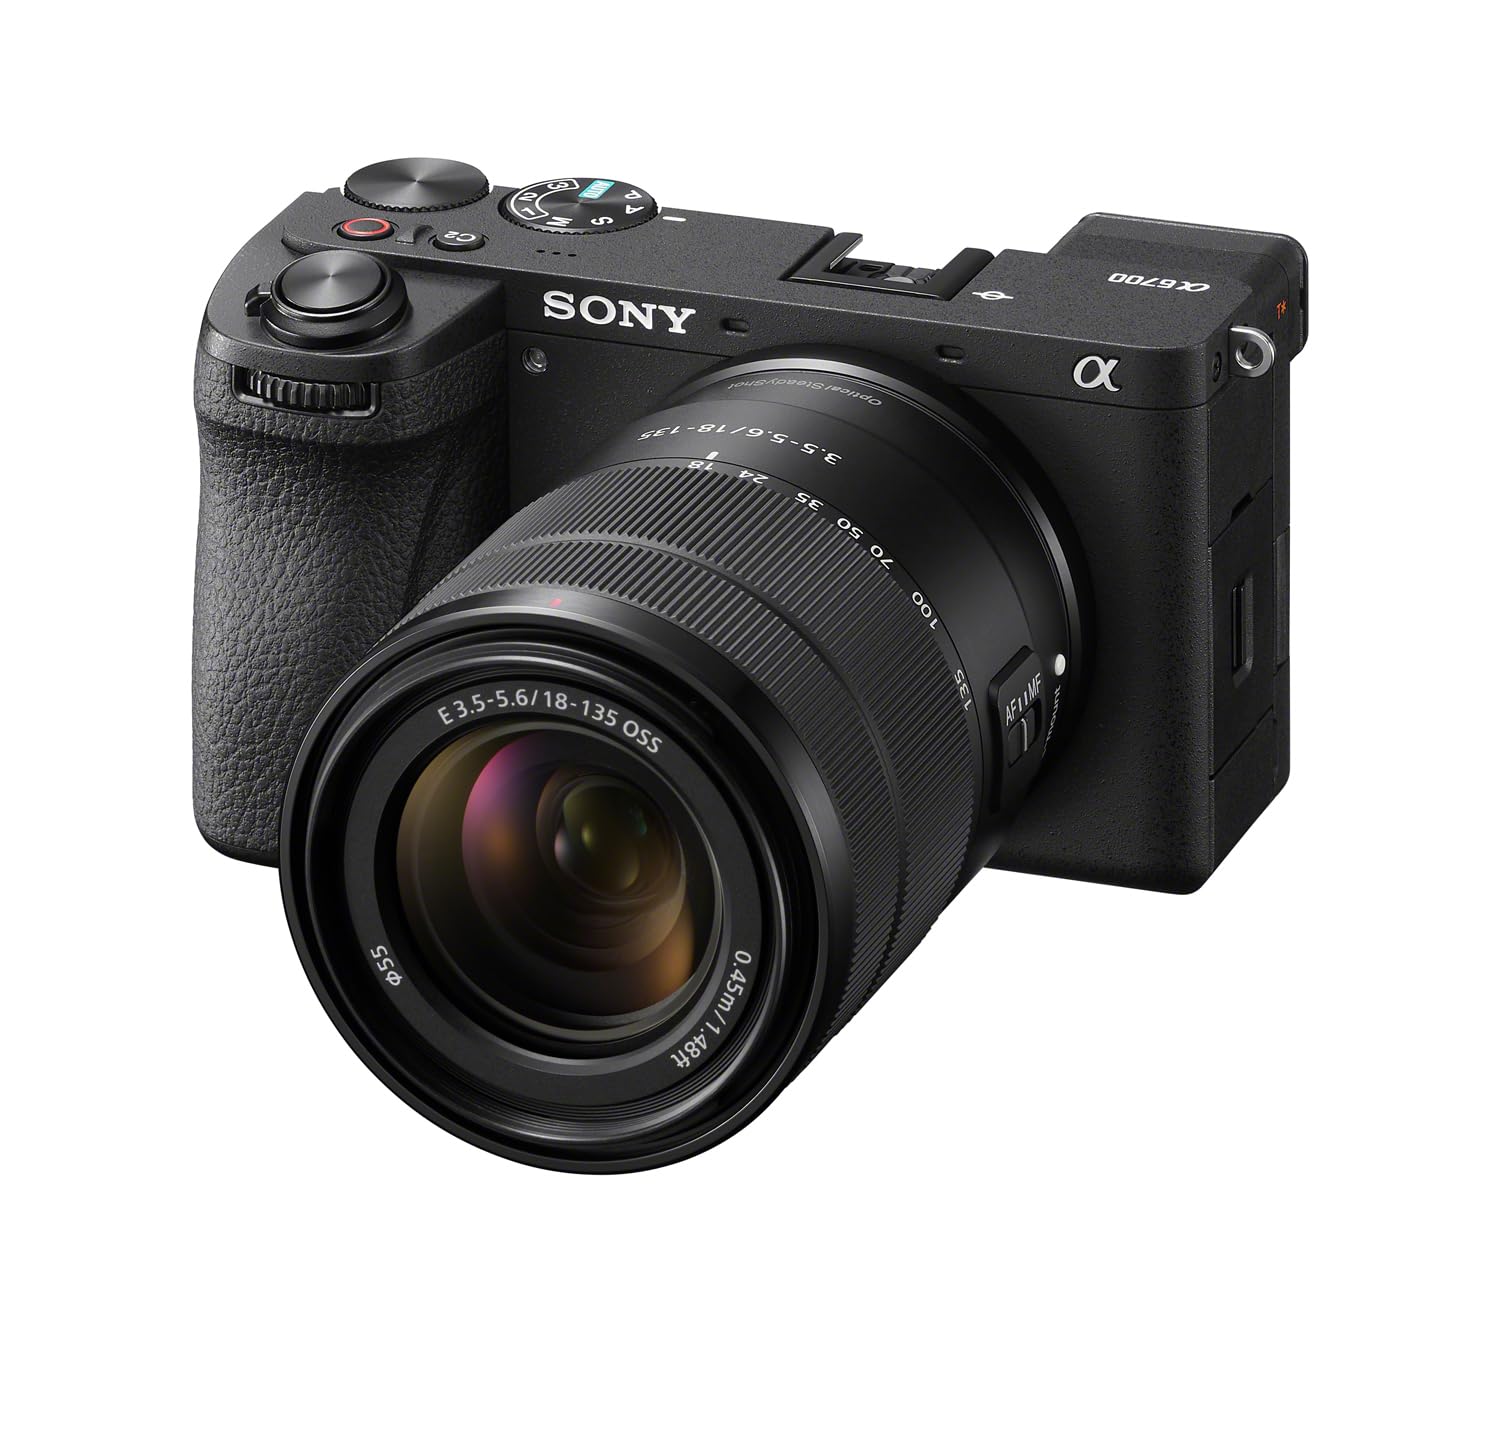 Sony Alpha 6700 – APS-C Interchangeable Lens Camera with 24.1 MP Sensor, 4K Video, AI-Based Subject Recognition, Log Shooting, LUT Handling and Vlog Friendly Functions and 18-135mm Zoom Lens